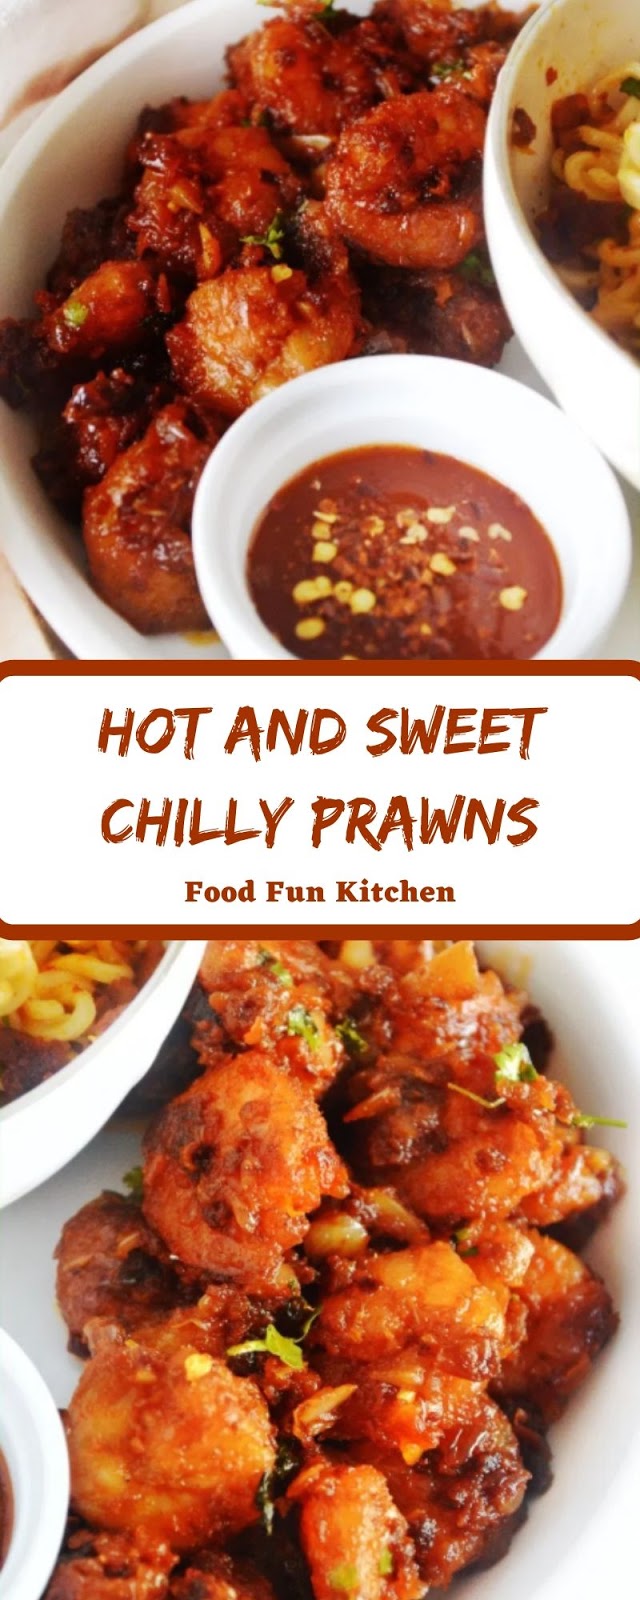 HOT AND SWEET CHILLY PRAWNS